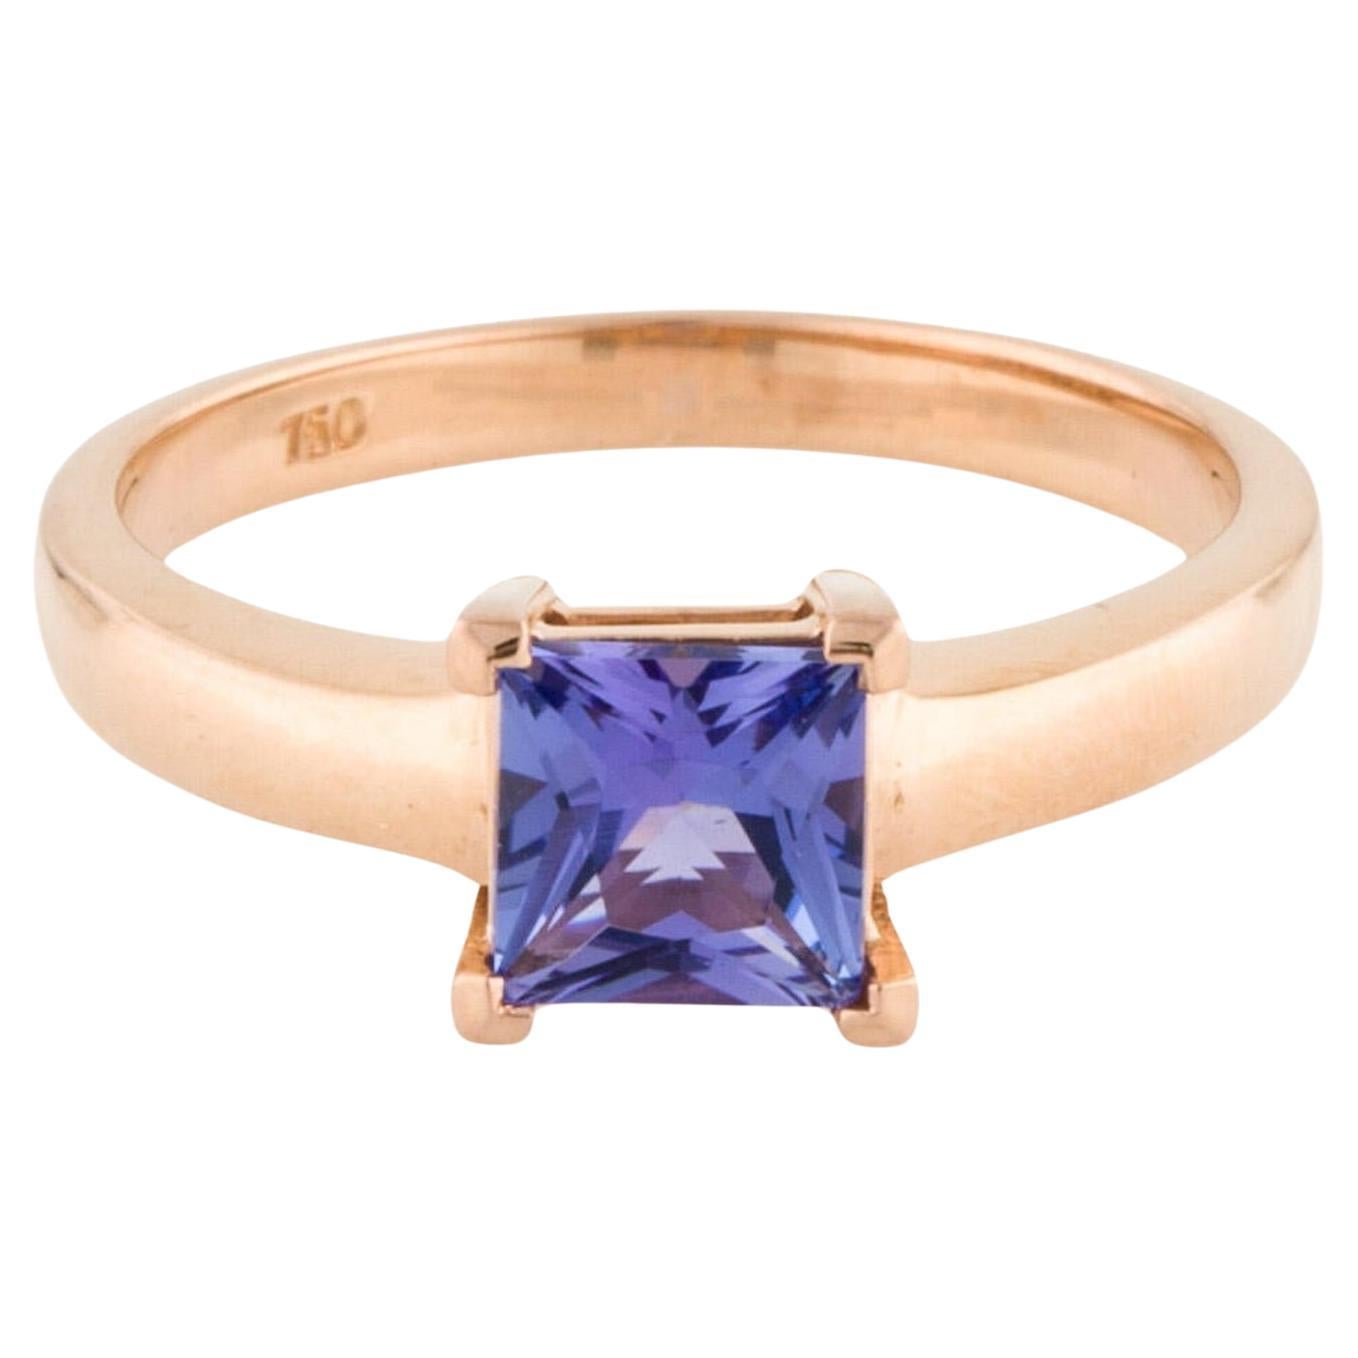 18K Tanzanite Cocktail Ring 2.50ctw - Size 7.75 - Exquisite Statement Jewelry For Sale